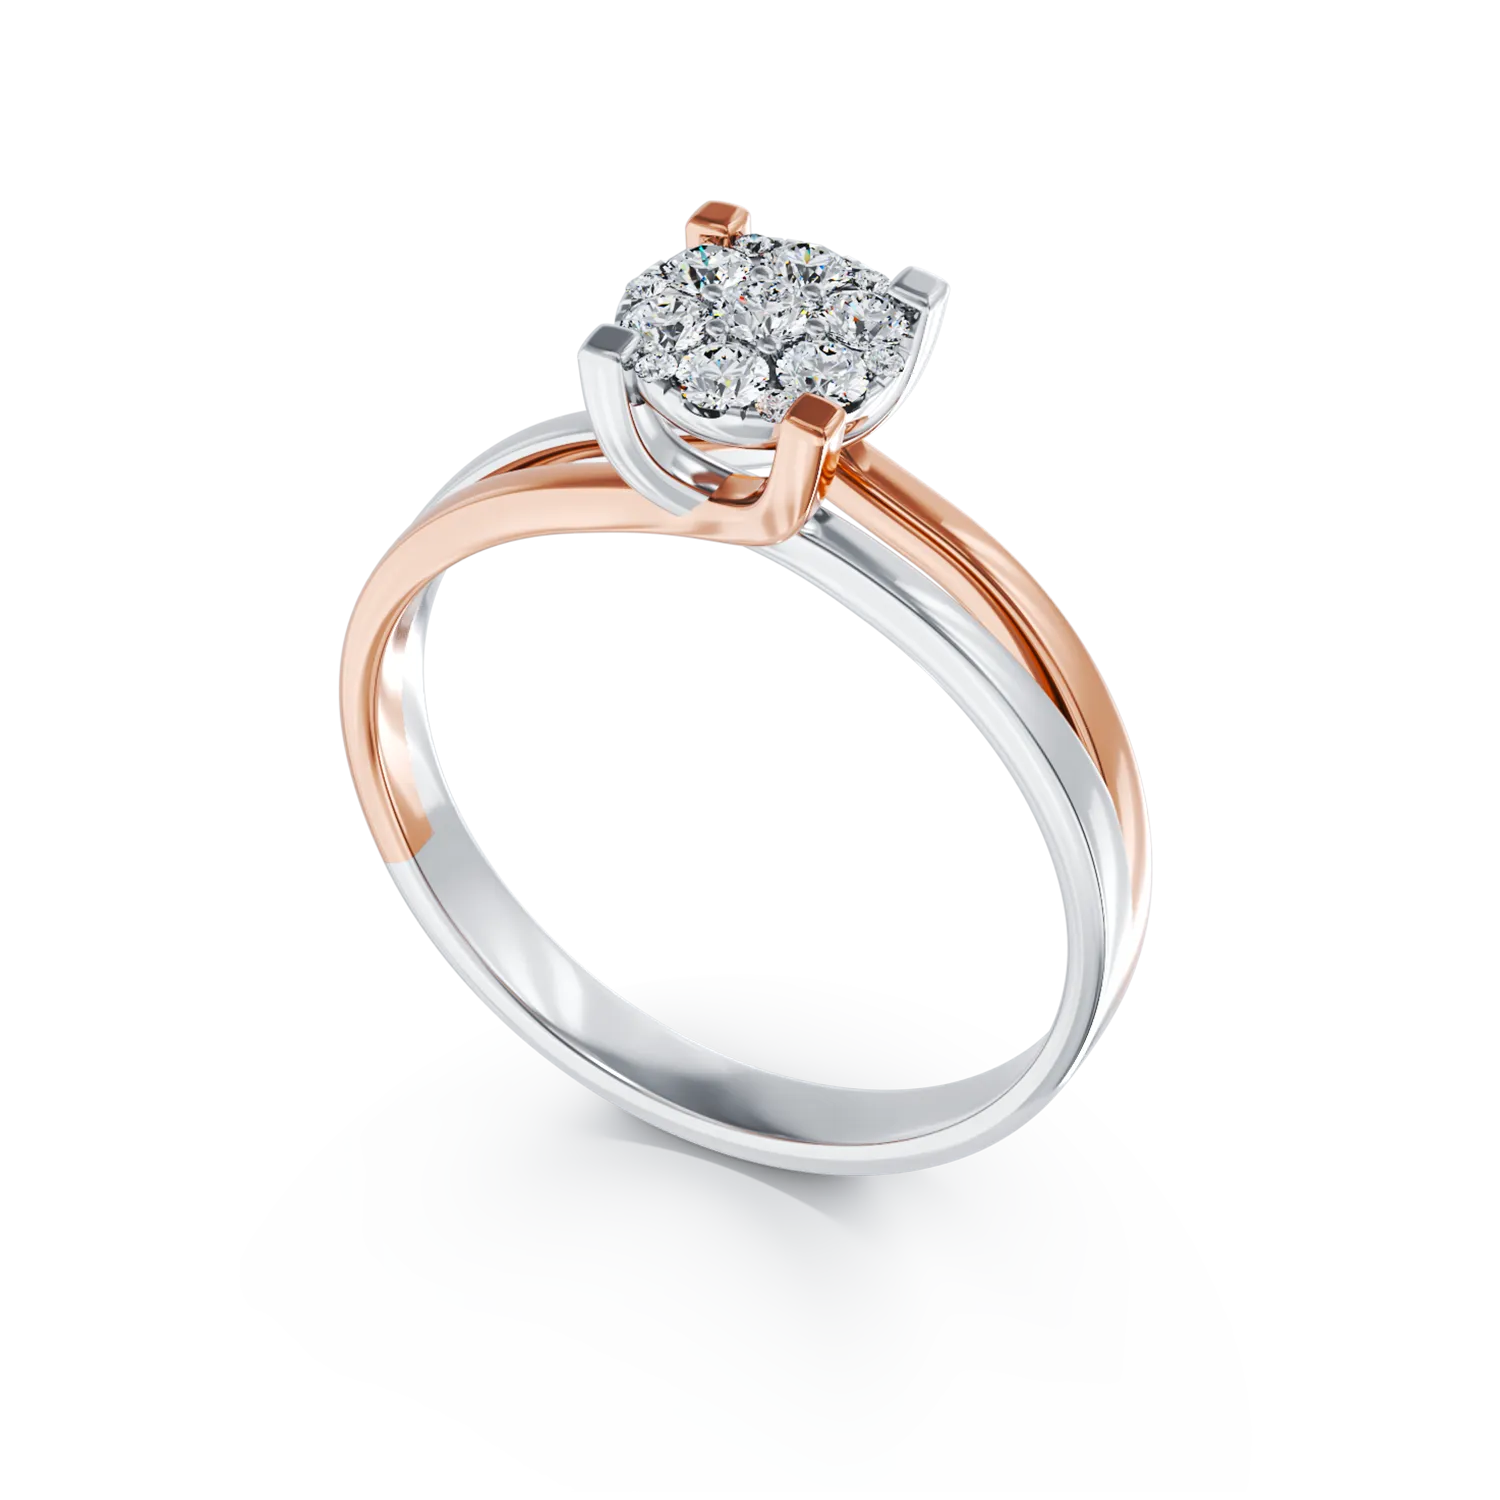 18K white-rose gold engagement ring with diamonds of 0.24ct